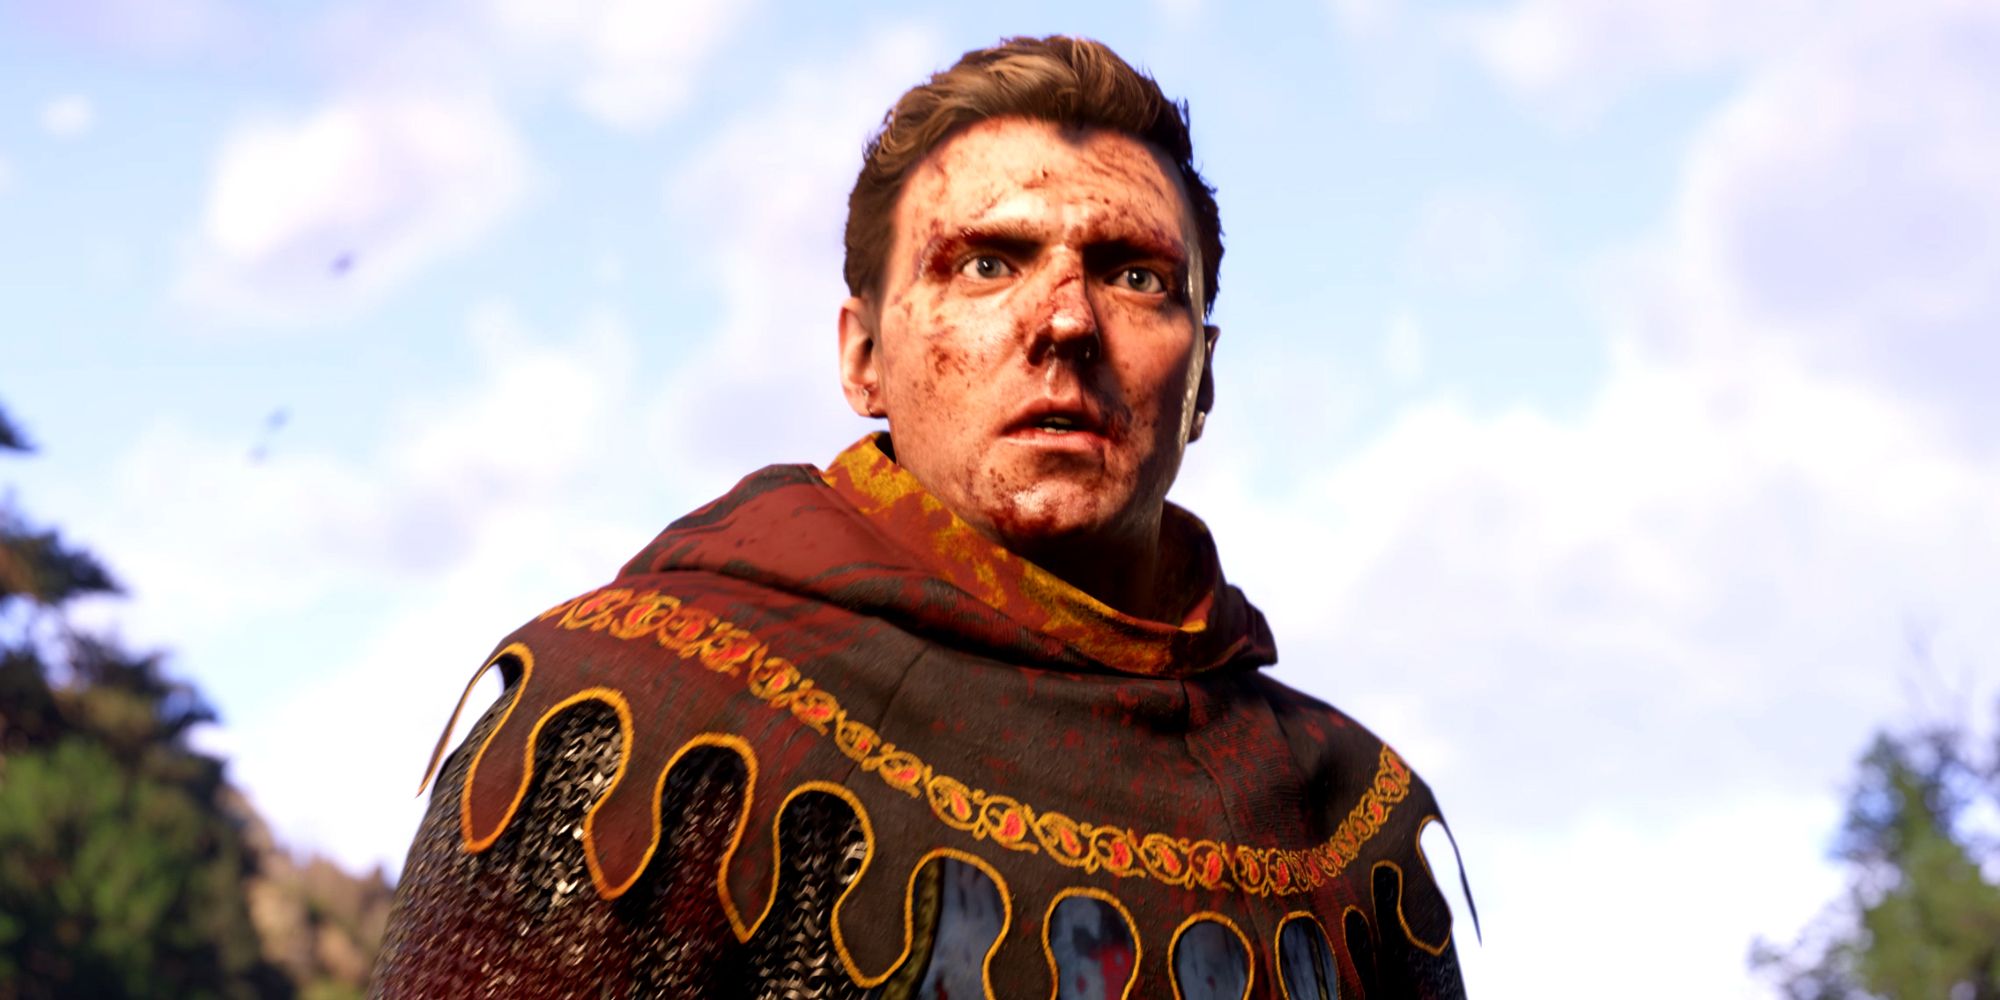 Henry, a squire covered in blood, looking forward in Kingdom Come Deliverance 2.